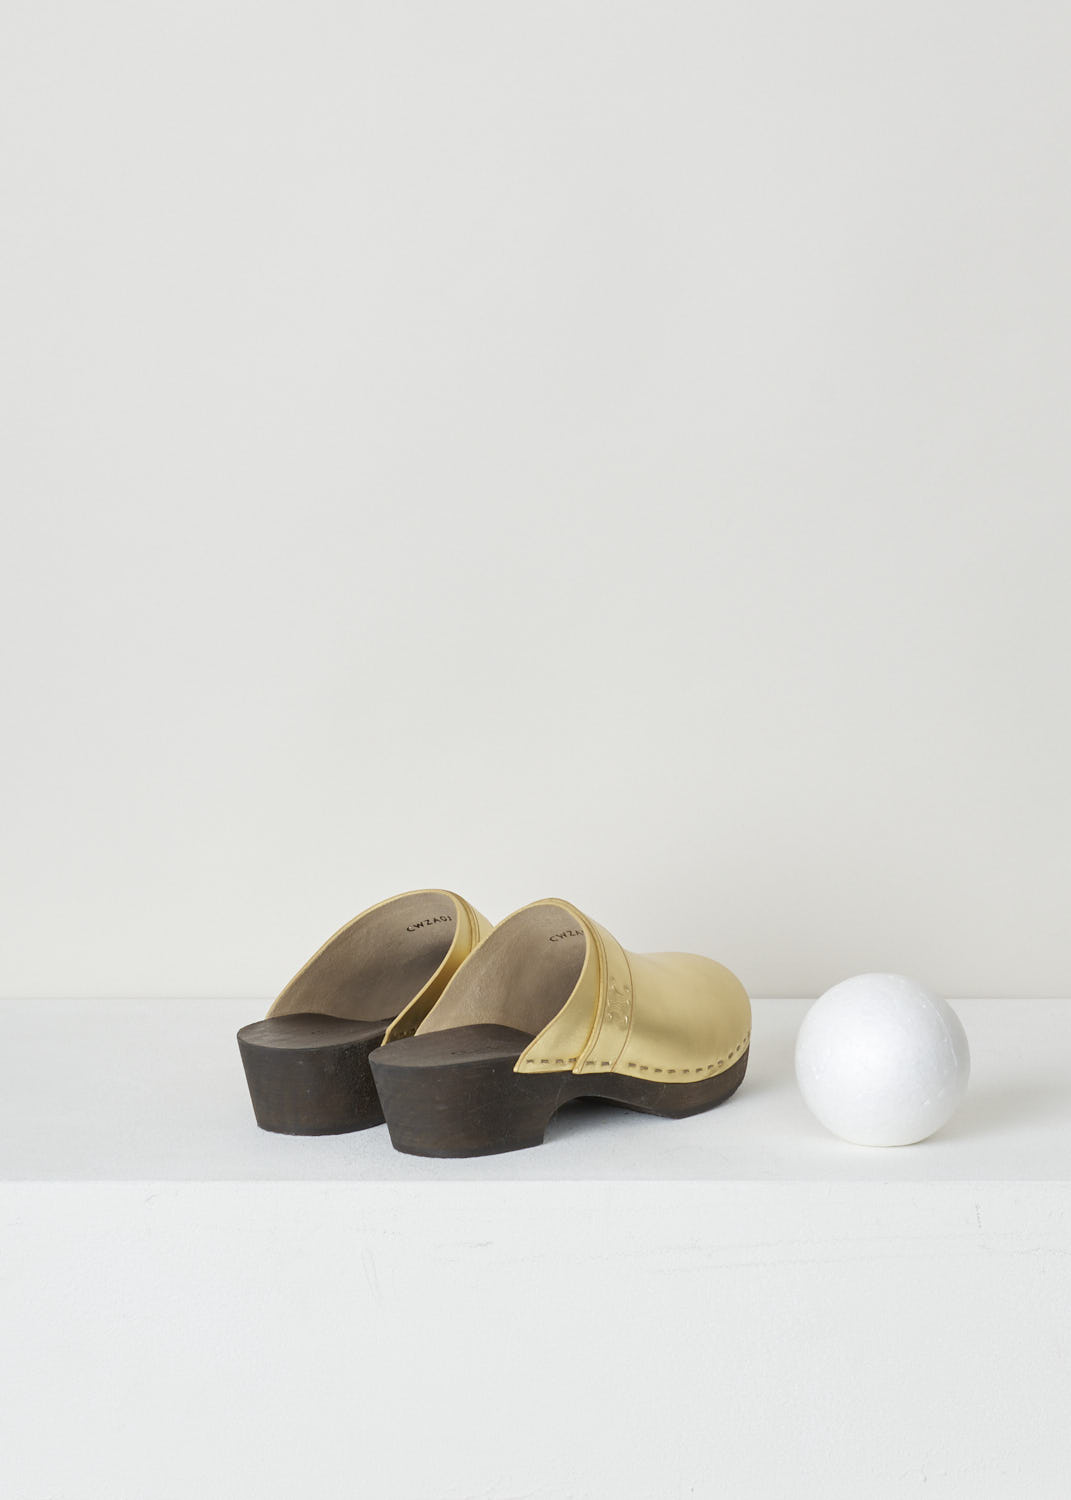 CELINE, METALLIC GOLD CLOGS, 337753093C_35OR, Gold, Back, These regal metallic gold clogs have a rounded nose. This slip-in model has a broad, wood-style sole with a small heel. Across the width of the shoe, a small strip with the Celine Triomphe logo can be found. 


Heel height: 3 cm / 1.18 inch
